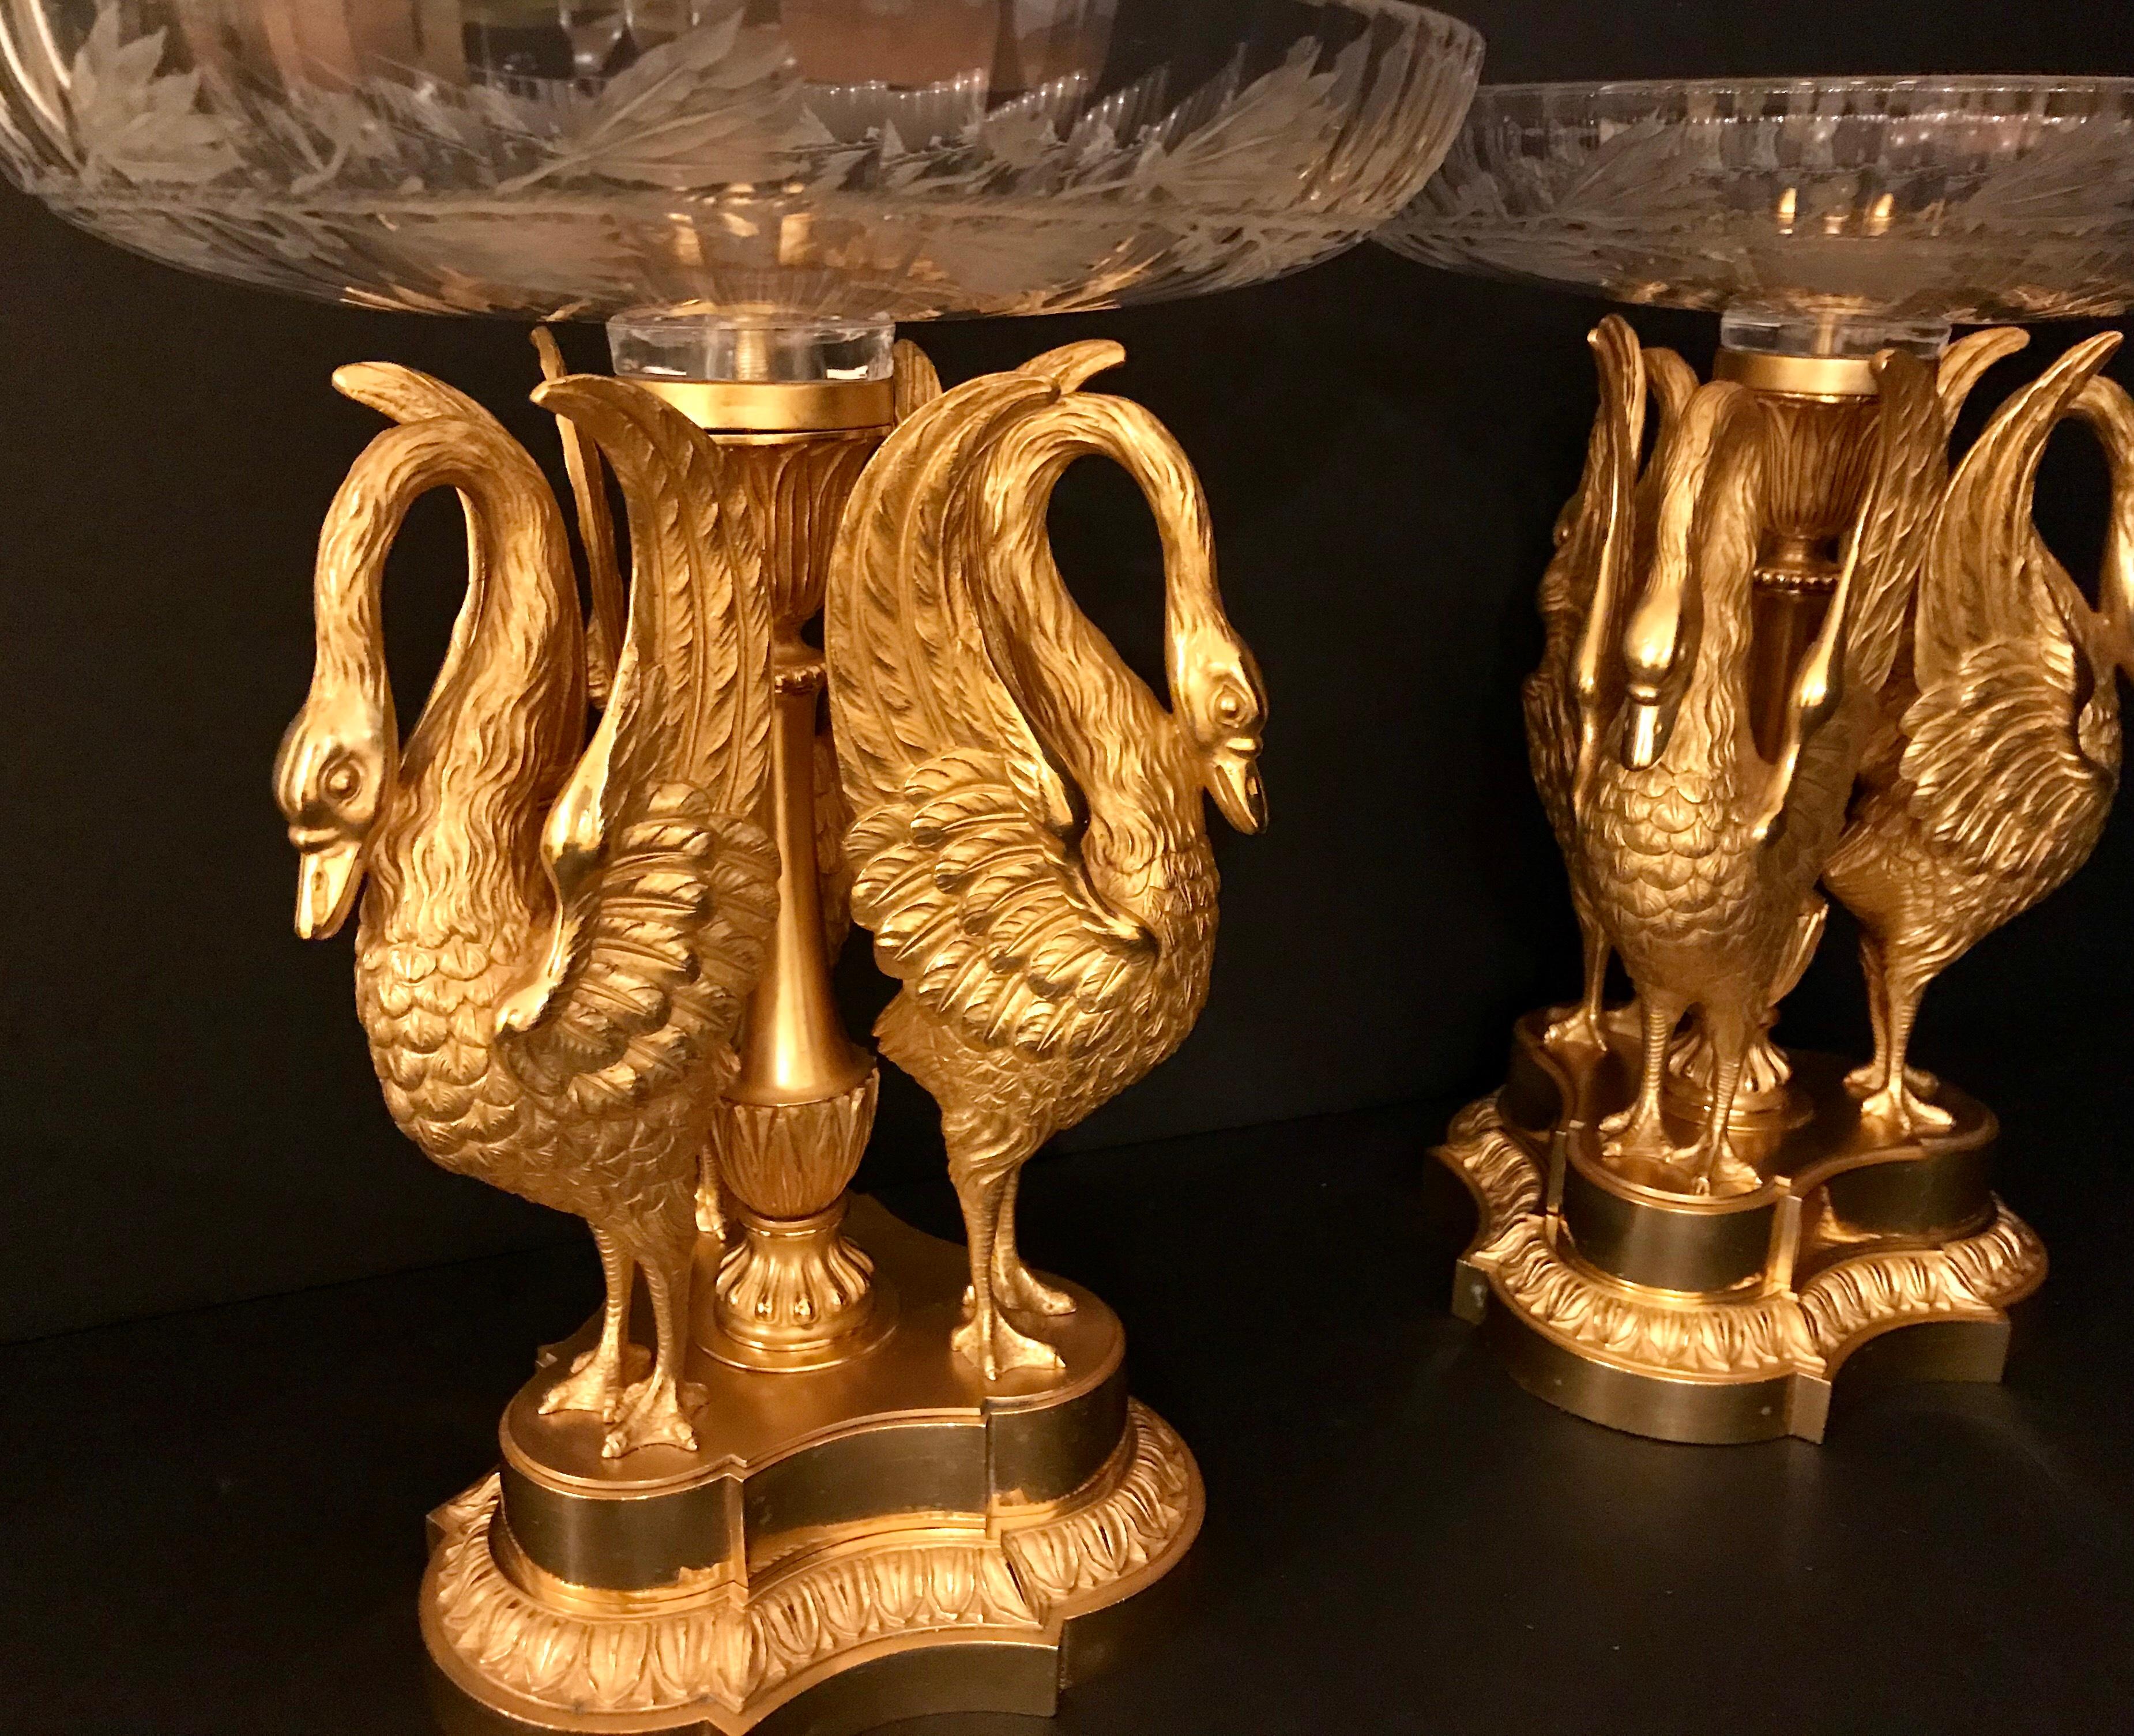 Magnificent pair of Russian Ormolu and Baccarat crystal centerpieces. The removable Baccarat Tazzas with engraved in deeply cut laurel wreath motif sit atop an ormolu sculpture of three finely hand chiseled Swans on Tripartite bases. Mid to Late